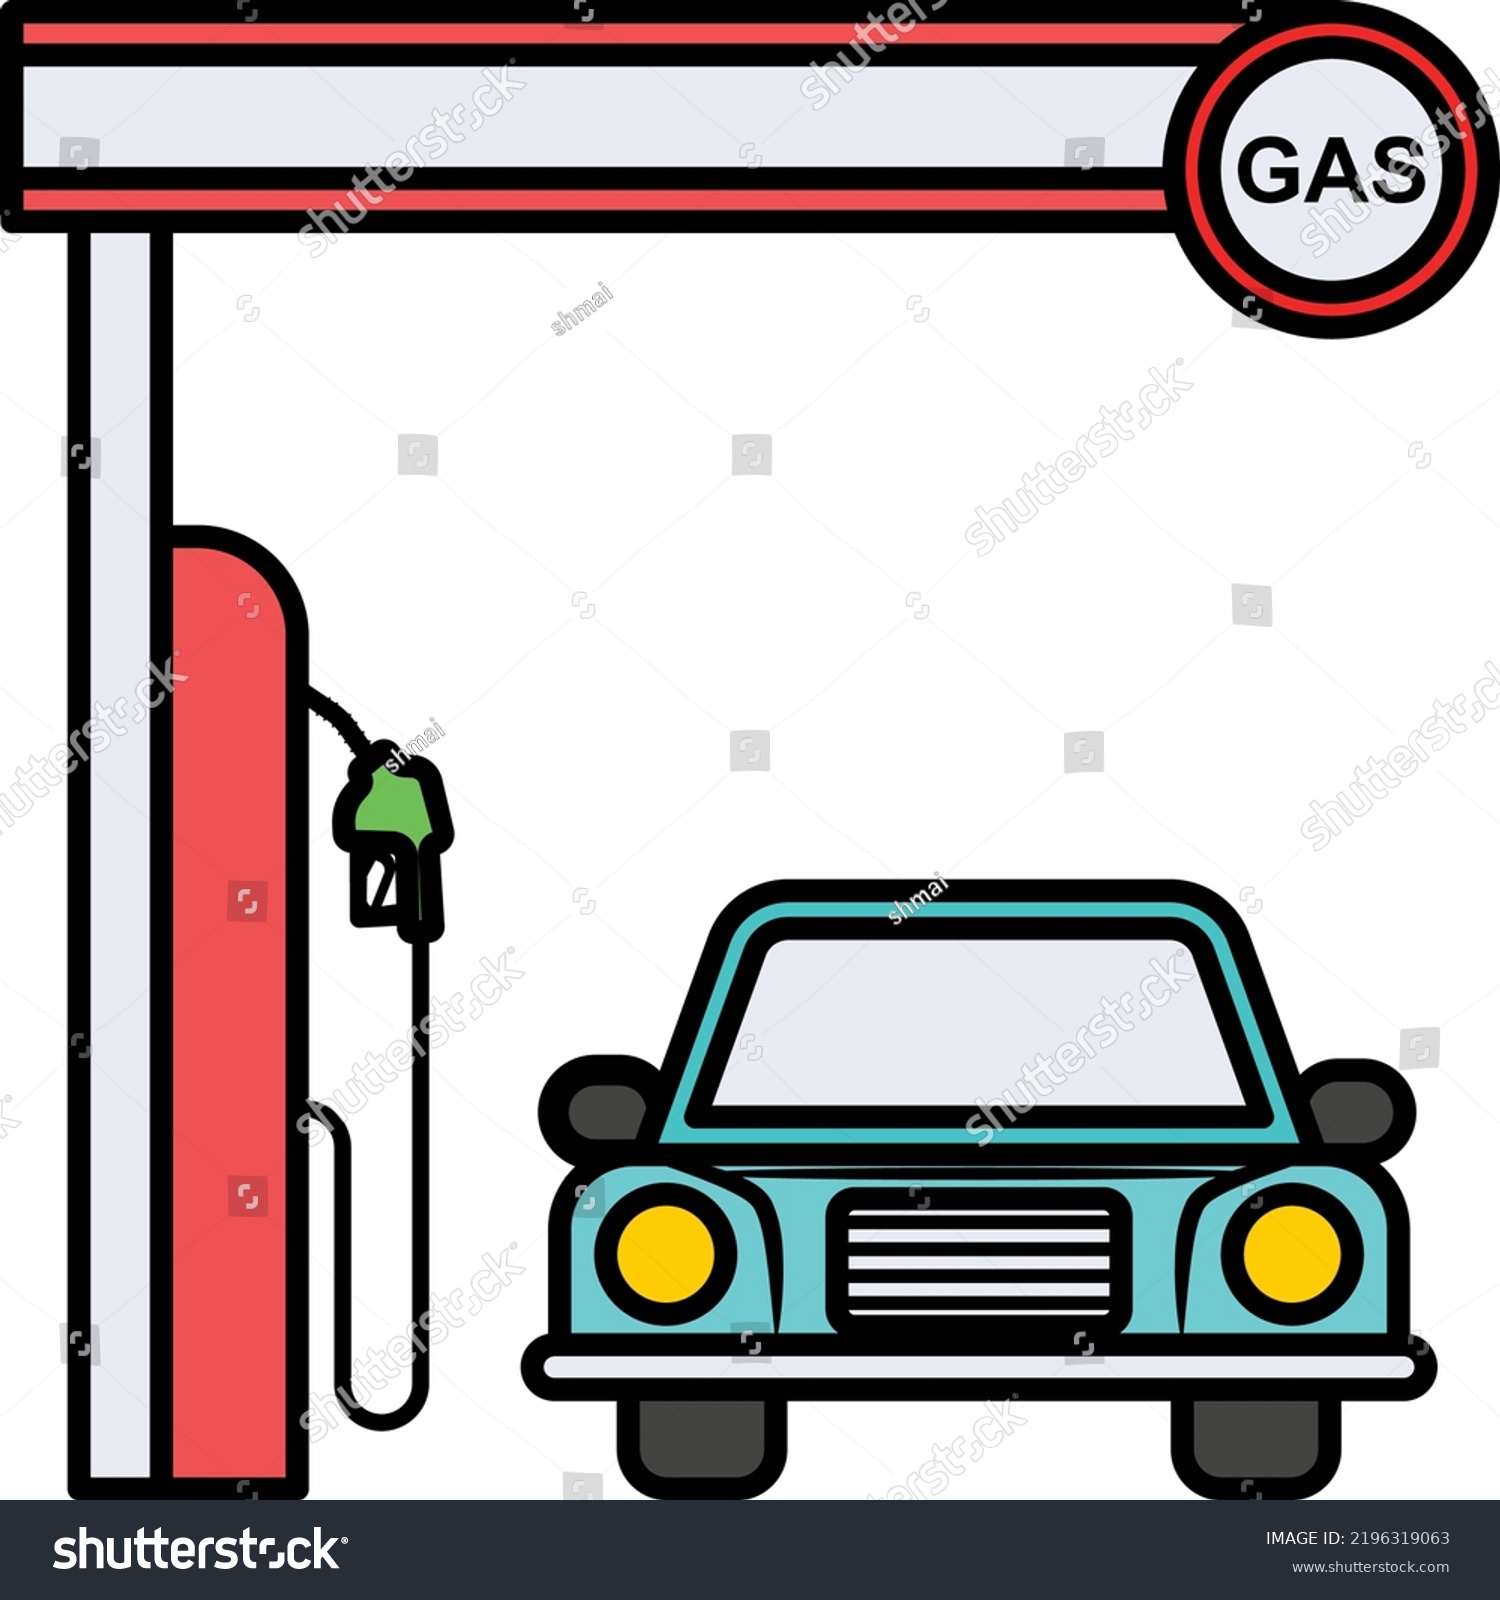 SVG of petrol bowsers with vehicle Front View Concept, gasoline pump Vector color Icon Design, crude oil and natural Liquid Gas Symbol, Petroleum and gasoline Sign, power and energy market stock illustration svg